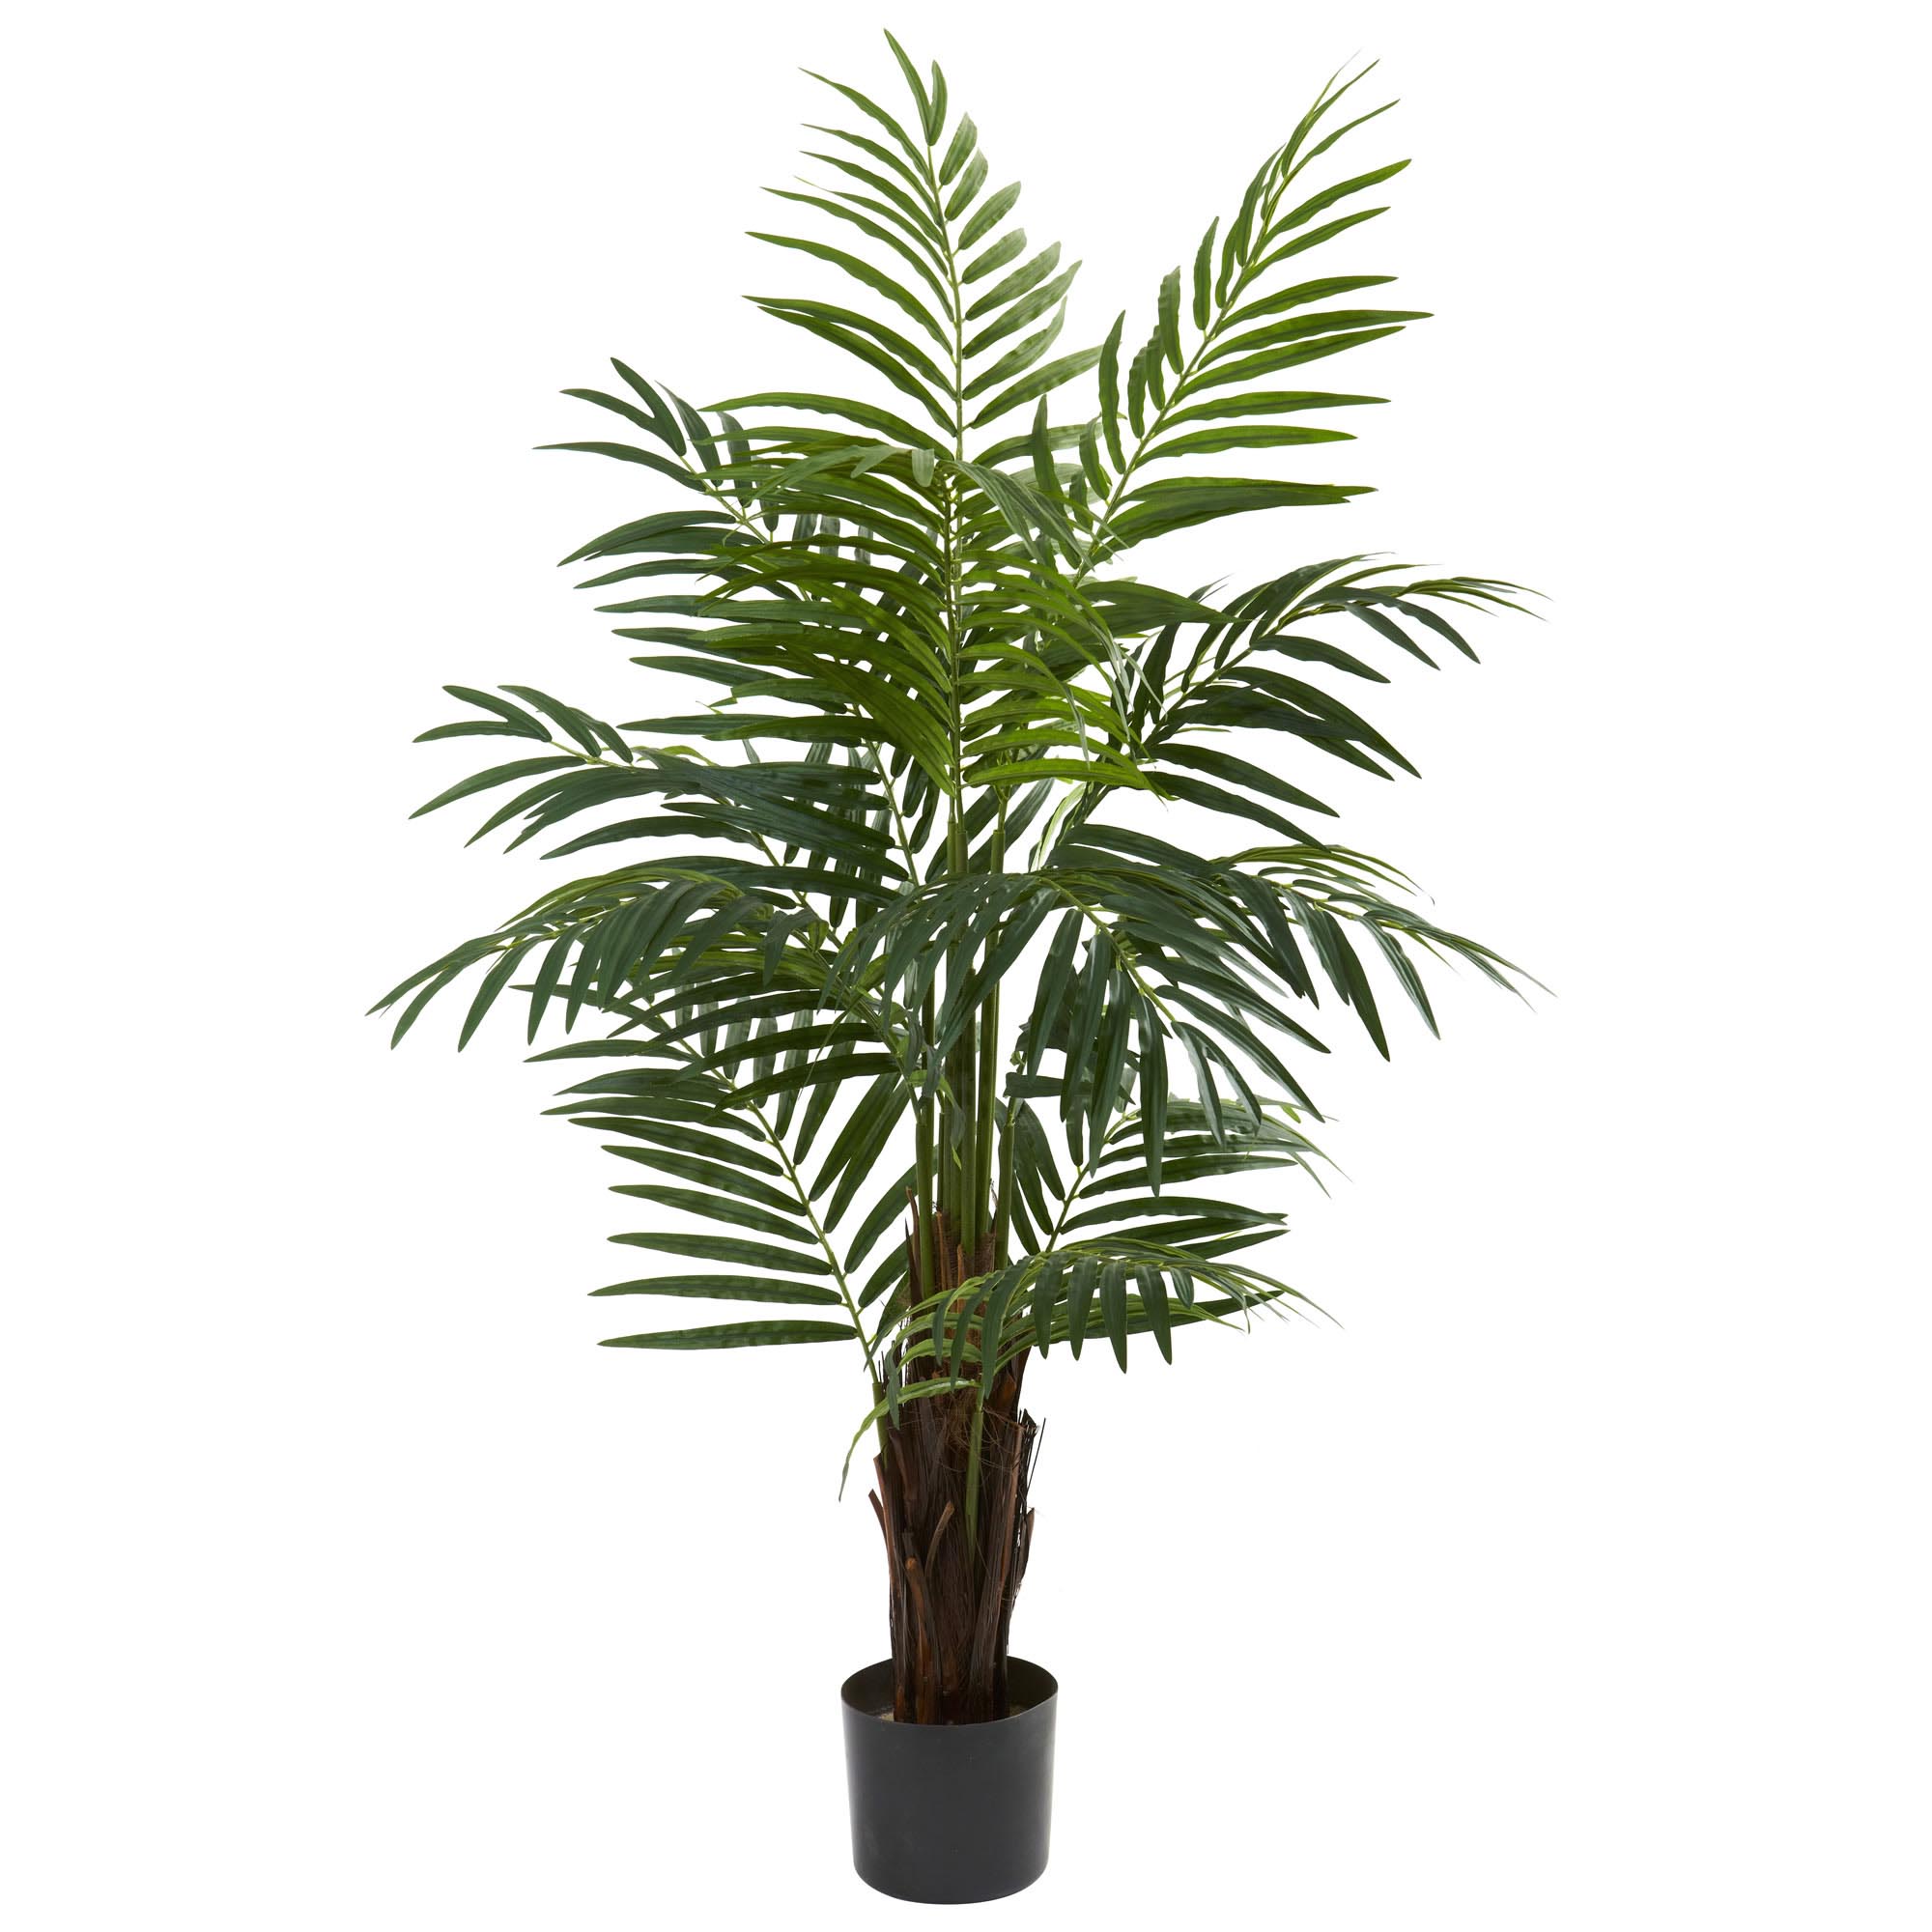 4 Foot Artificial Areca Palm Tree: Potted